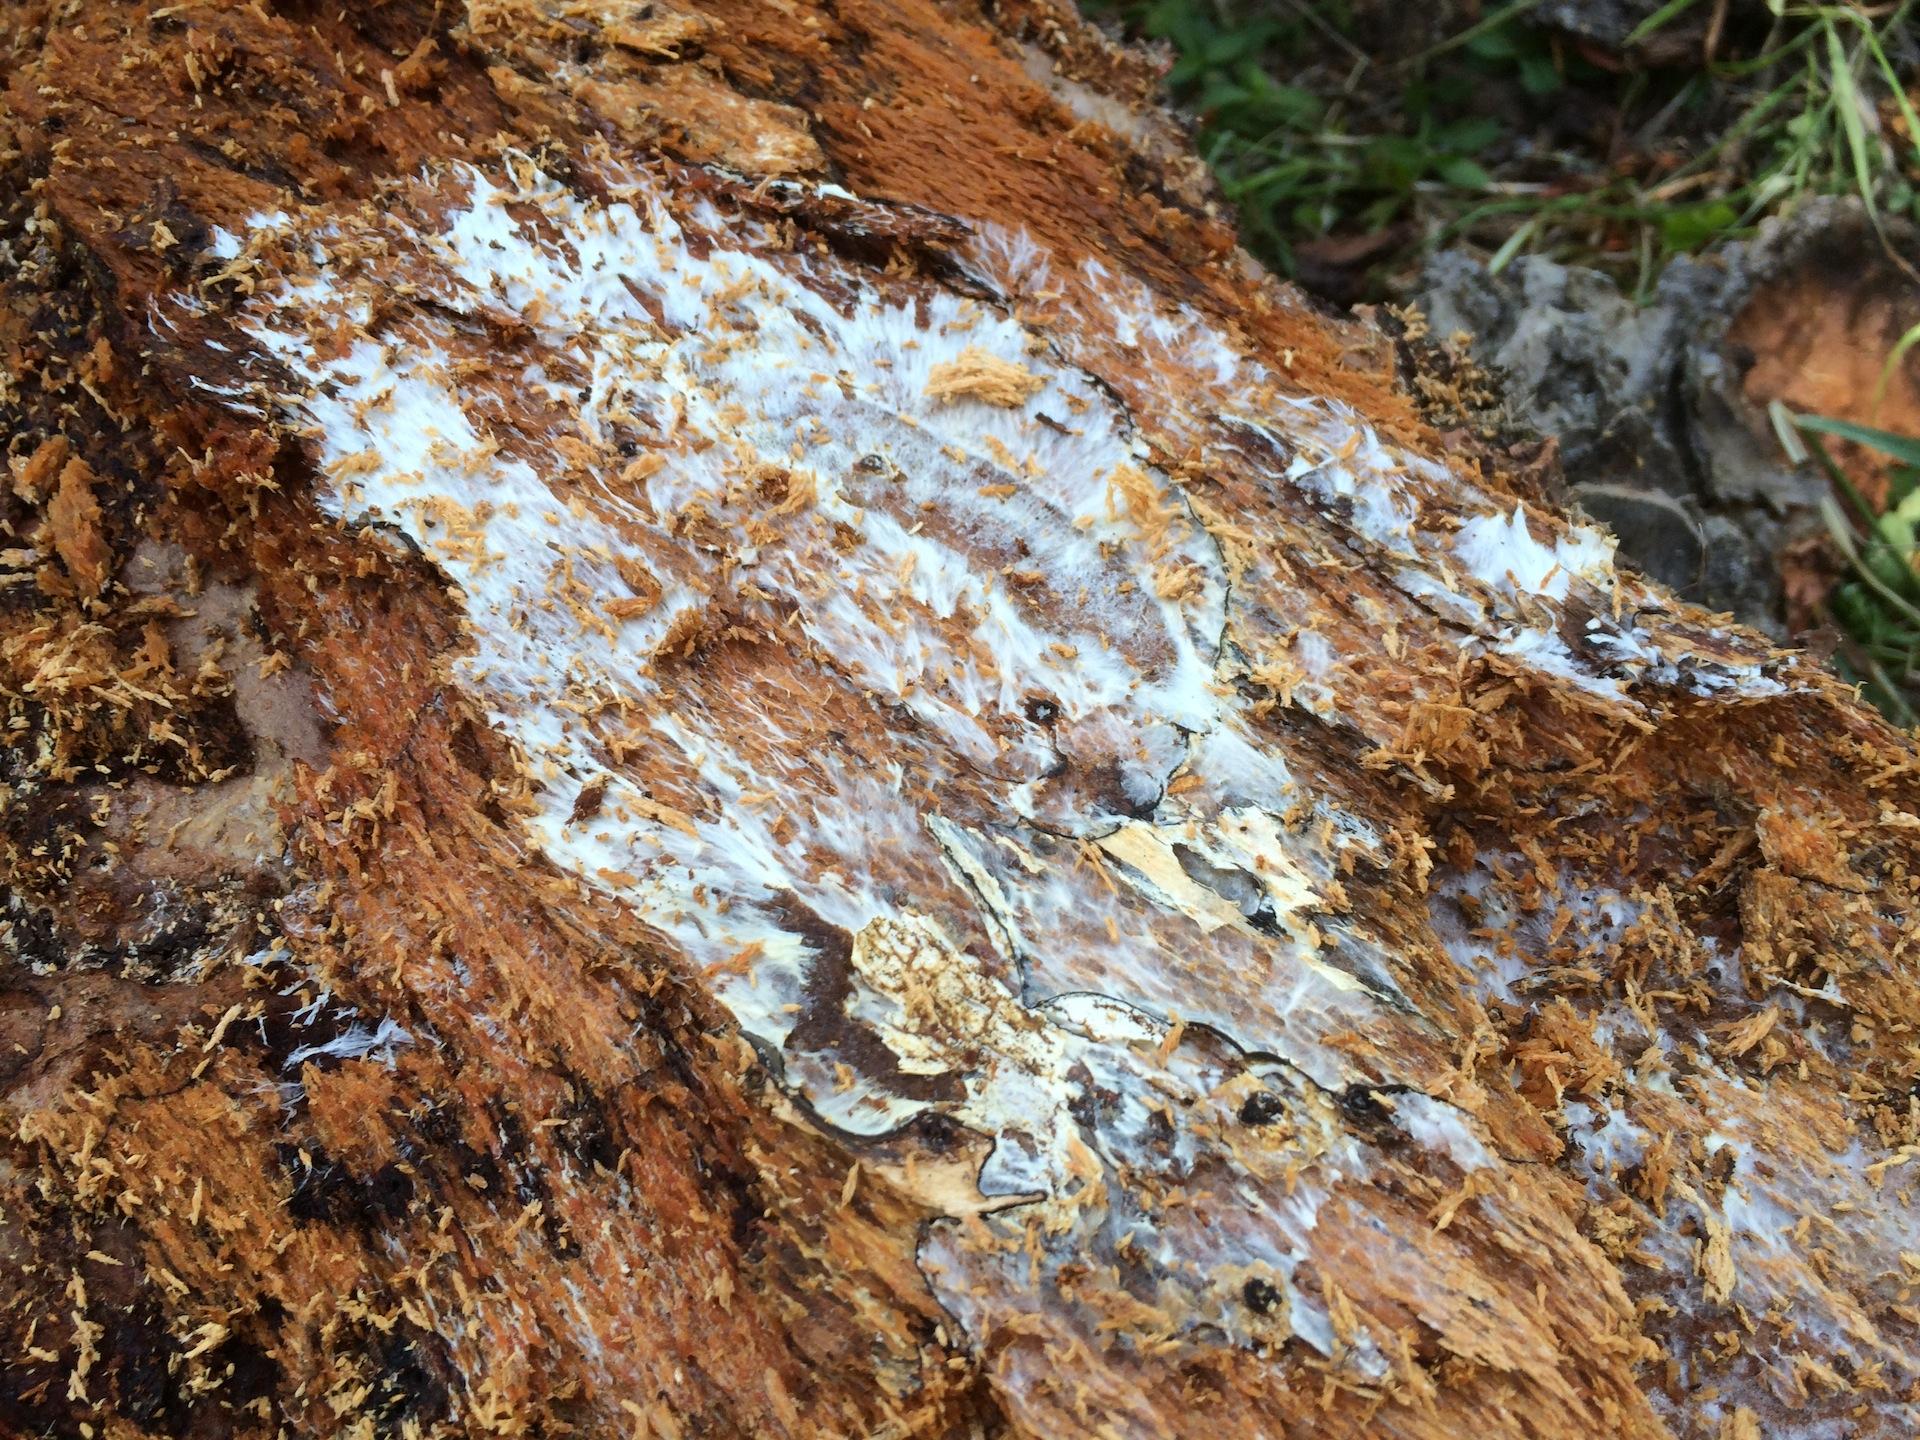 Oregon Humongous Fungus Sets Record As Largest Single Living Organism On Earth Opb